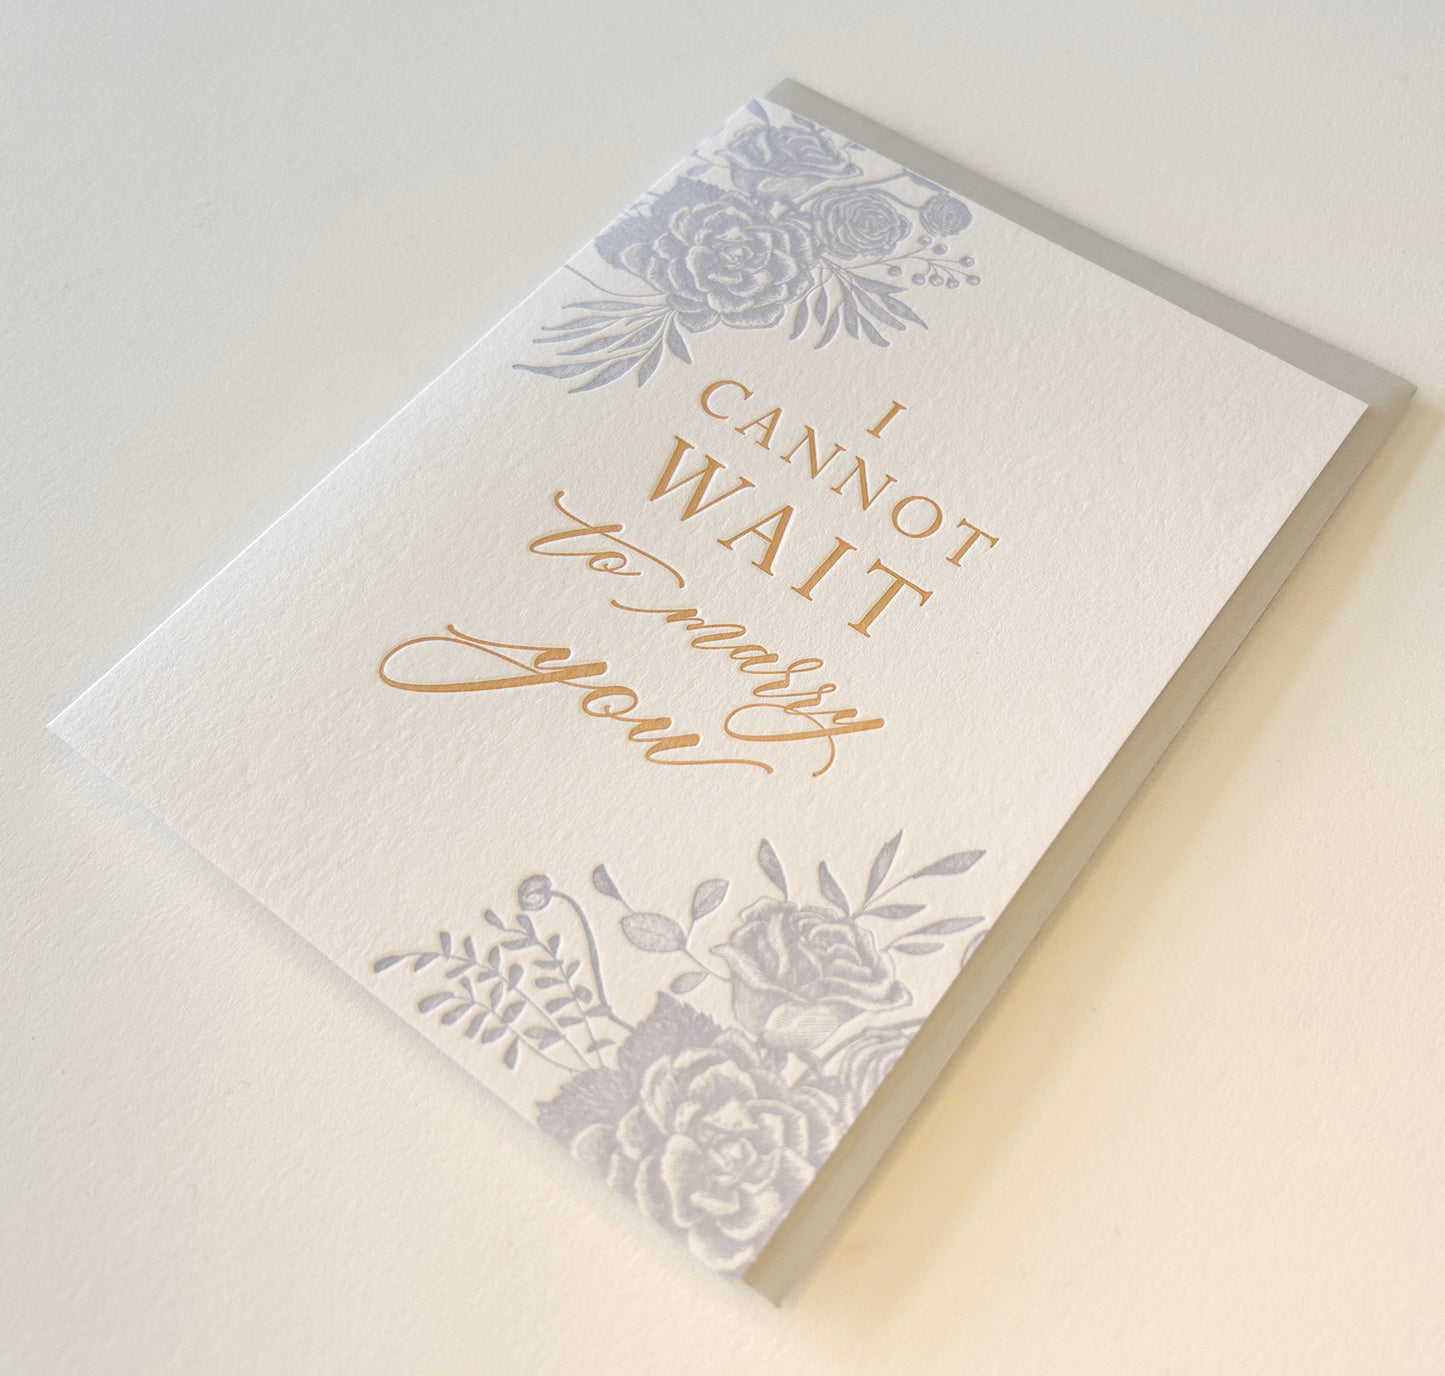 Letterpress wedding card with florals that says "I cannot wait to marry you" by Rust Belt Love